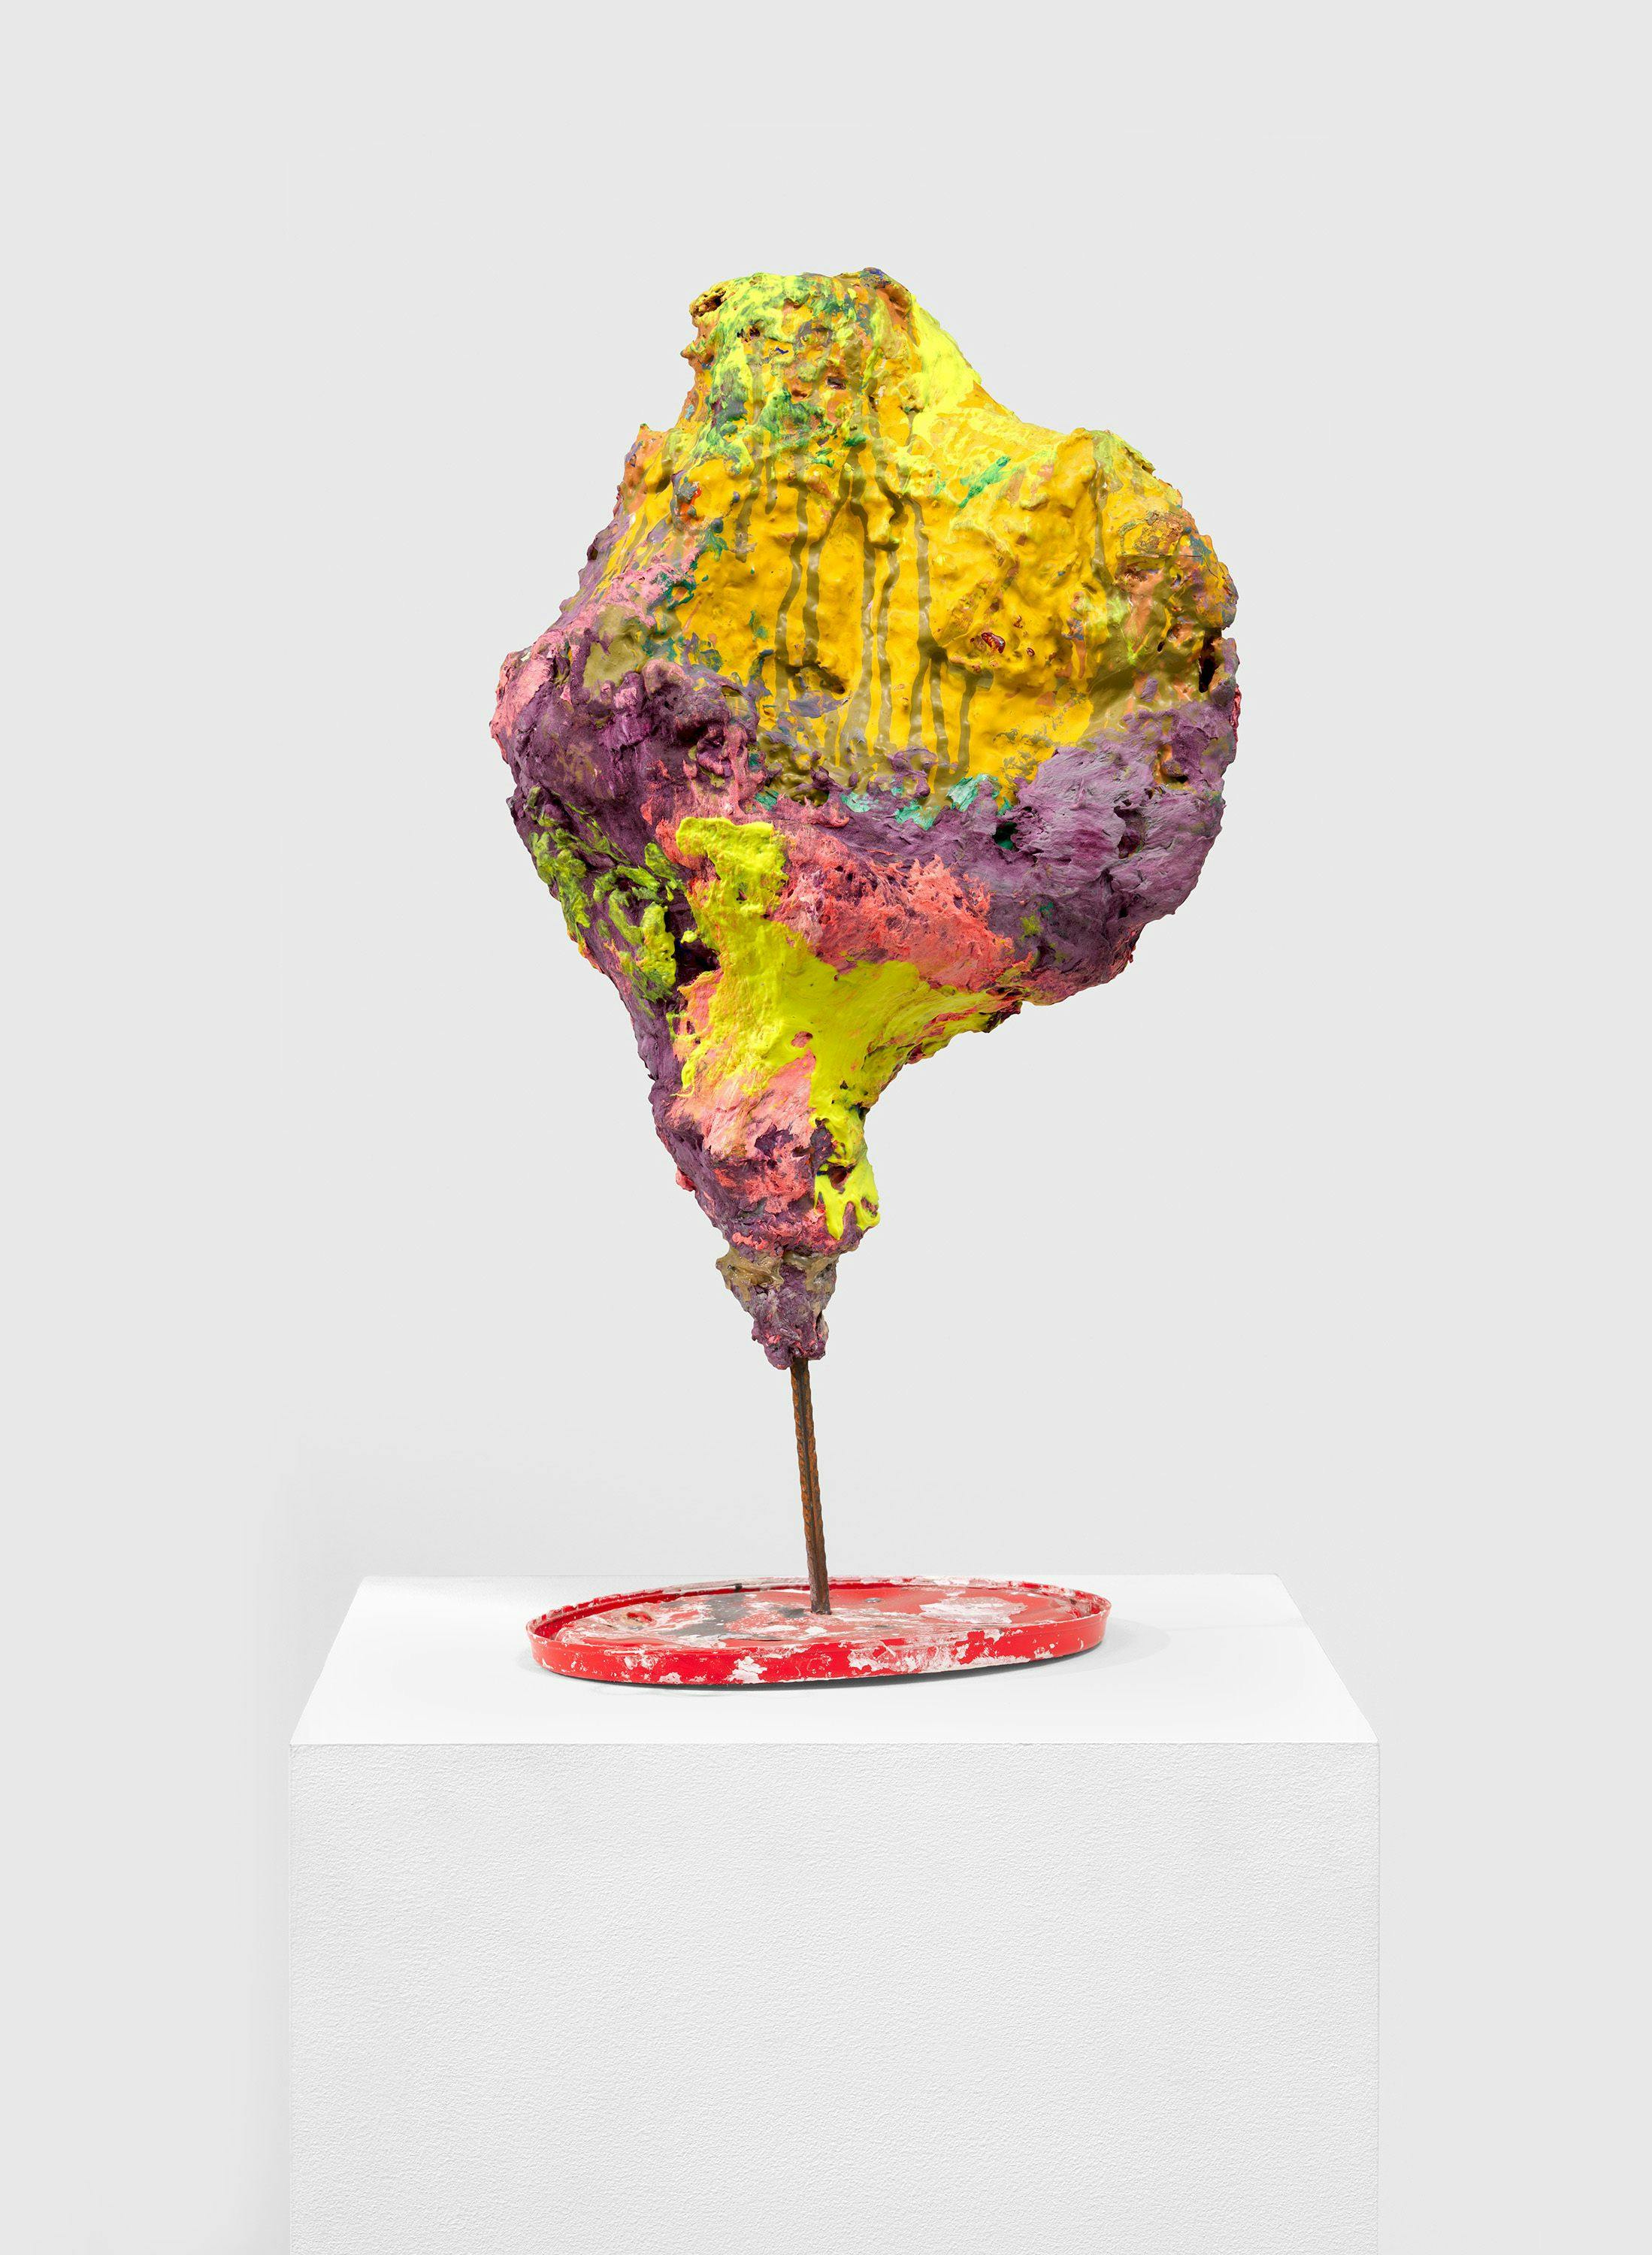 An untitled sculpture by Franz West, dated 1998.